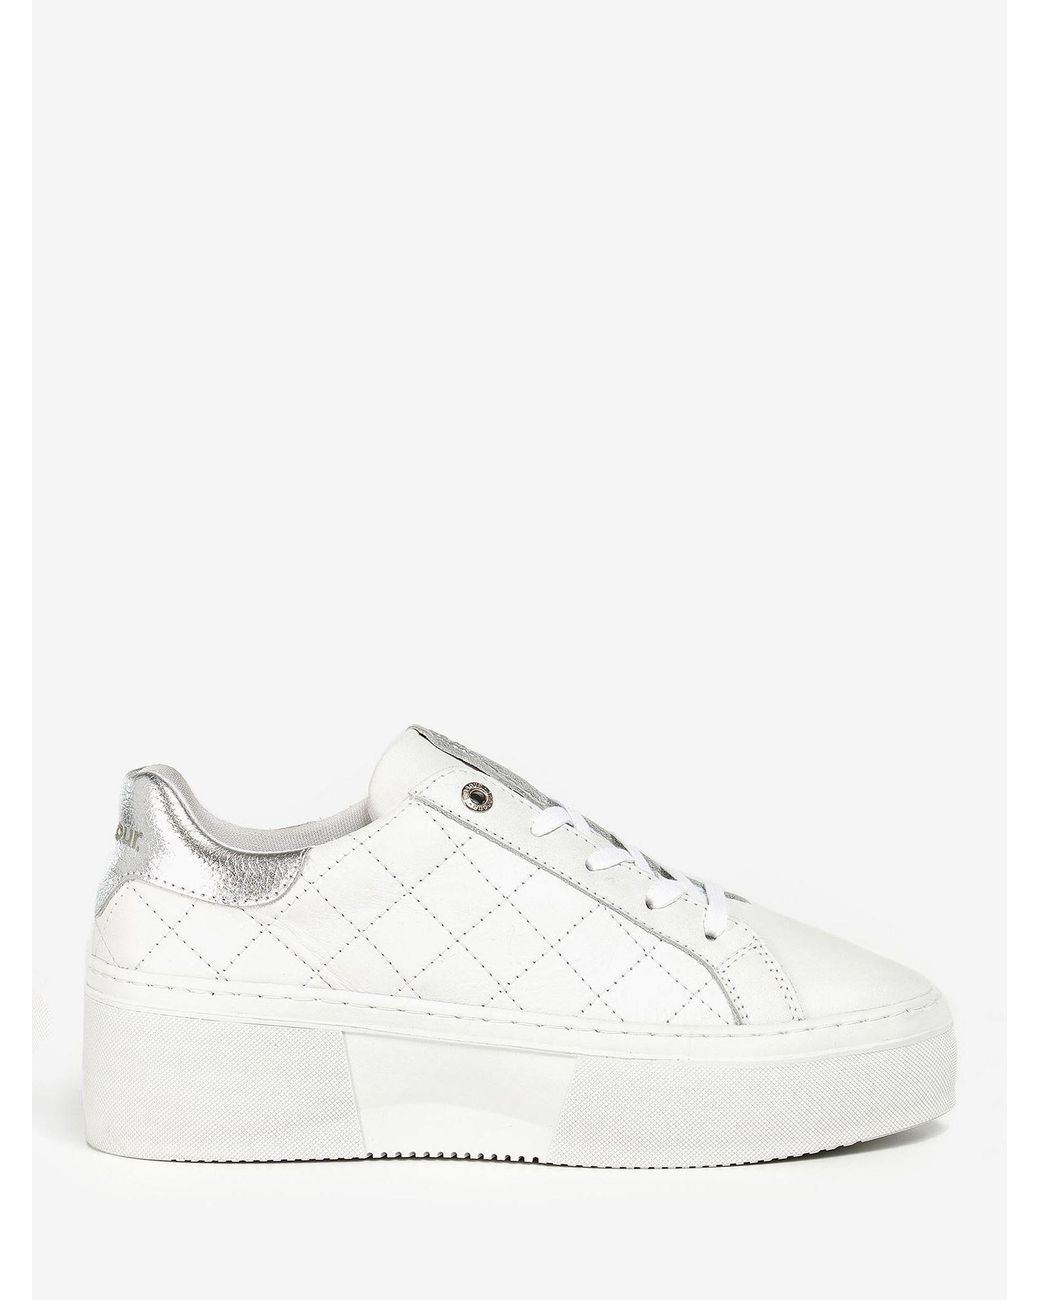 Barbour Darla Leather Diamond Quilted Flatform Trainers in White | Lyst UK